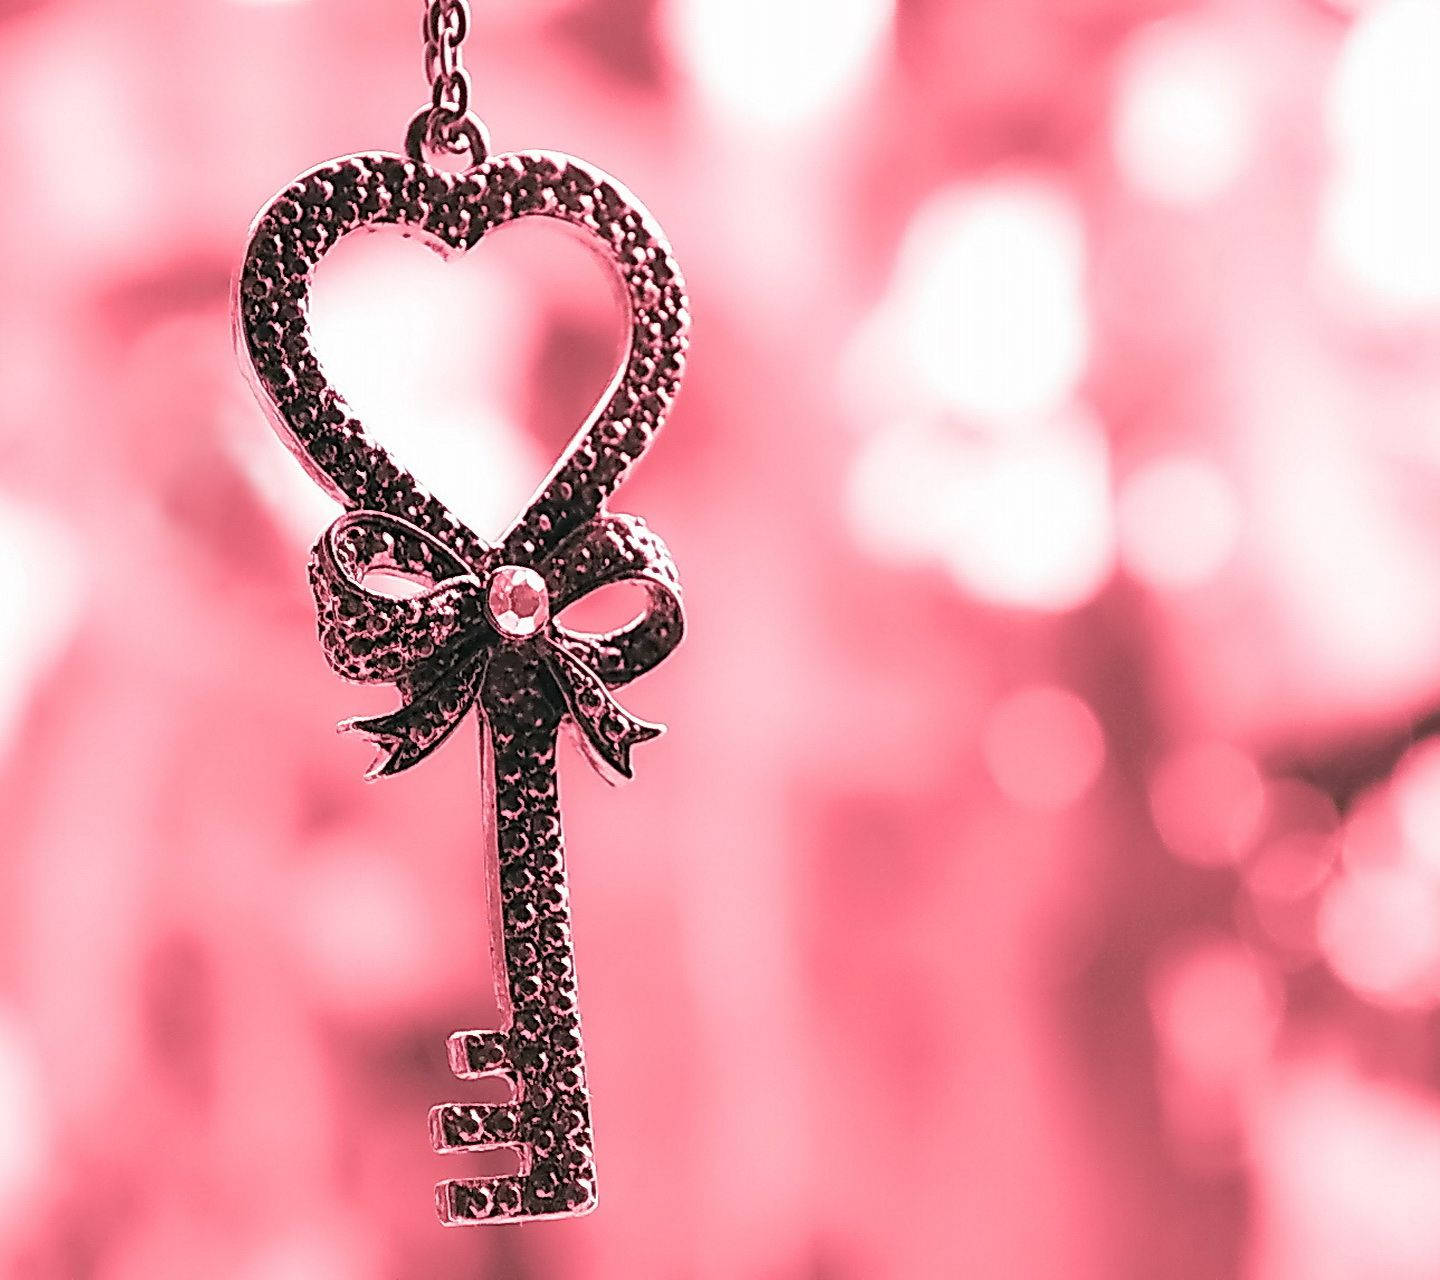 The Key To Love Wallpaper